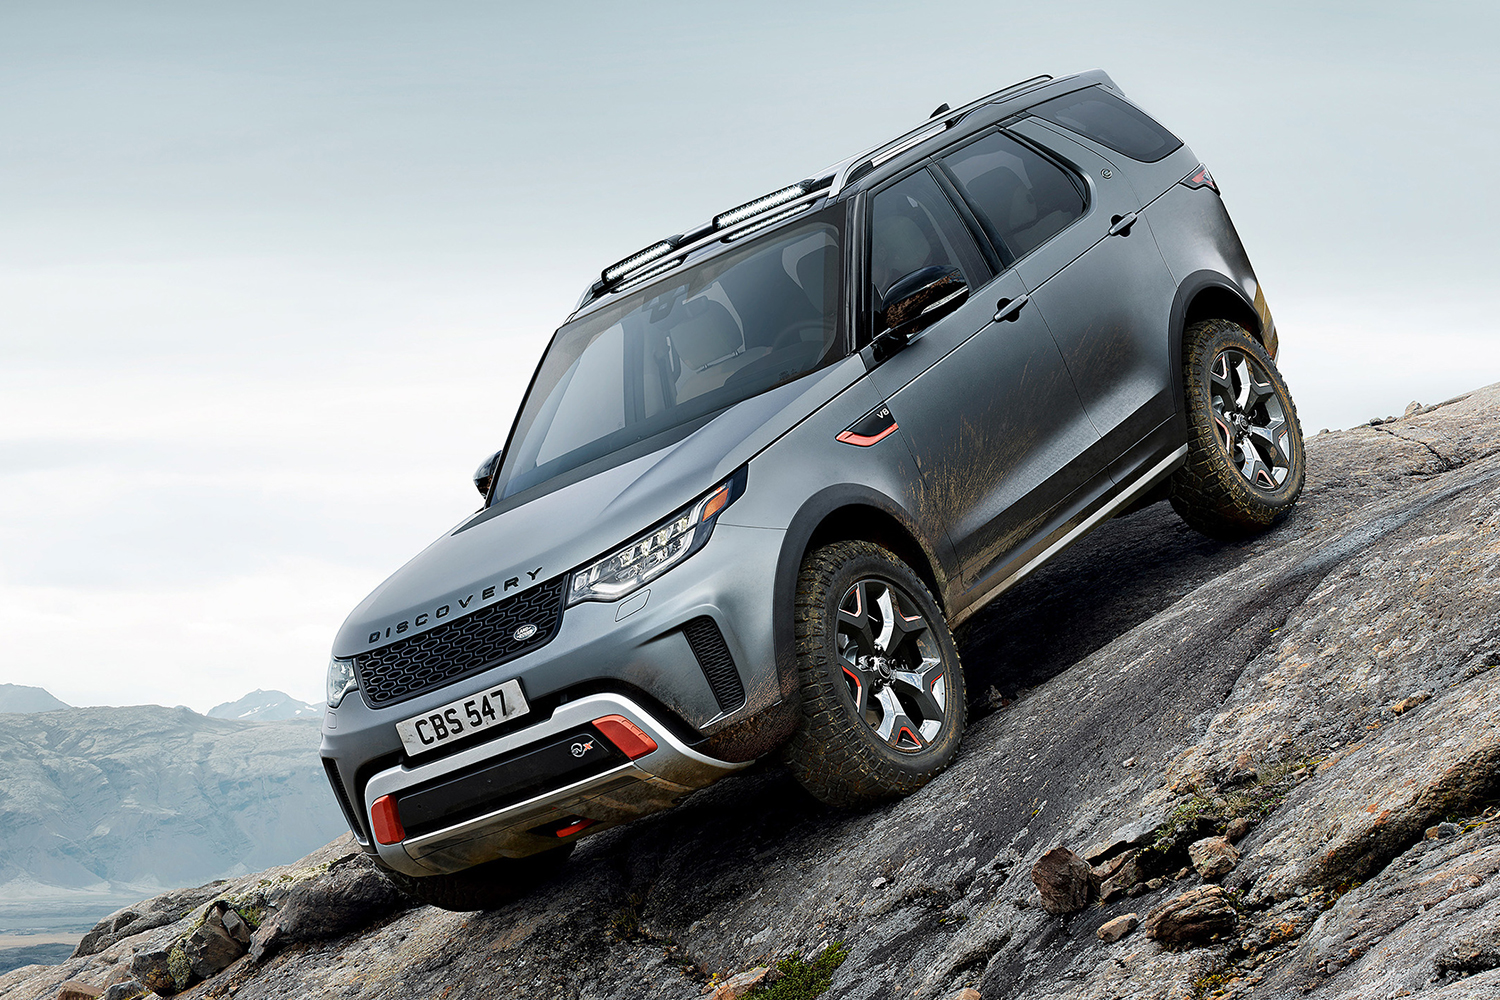 The Latest From Land Rover: Electrification and Diversification